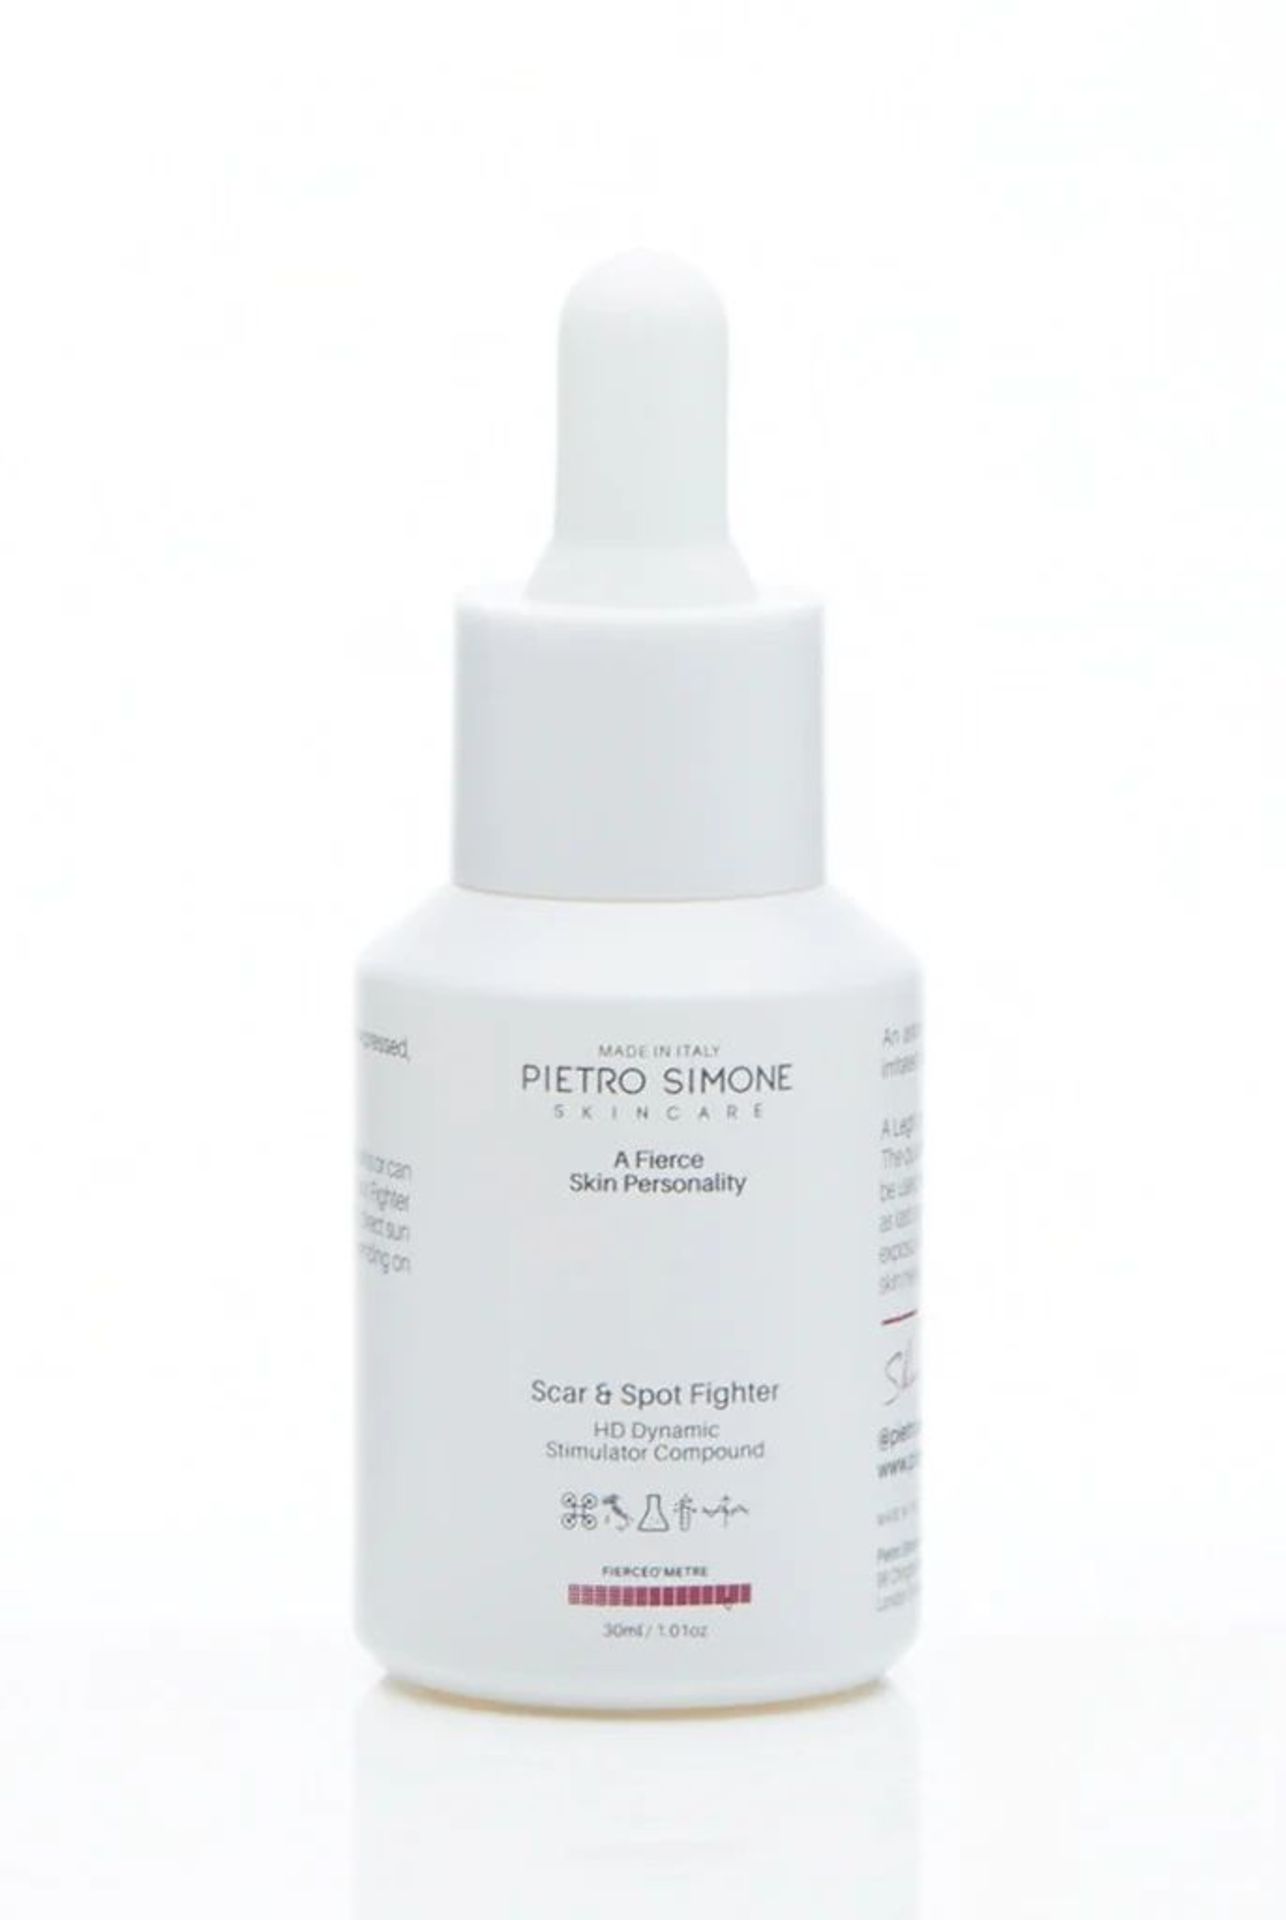 3x BRAND NEW PIETRO SIMONE The Fierce Collection Scar & Spot Fighter 30ml. RRP £55 EACH. (OFC). An